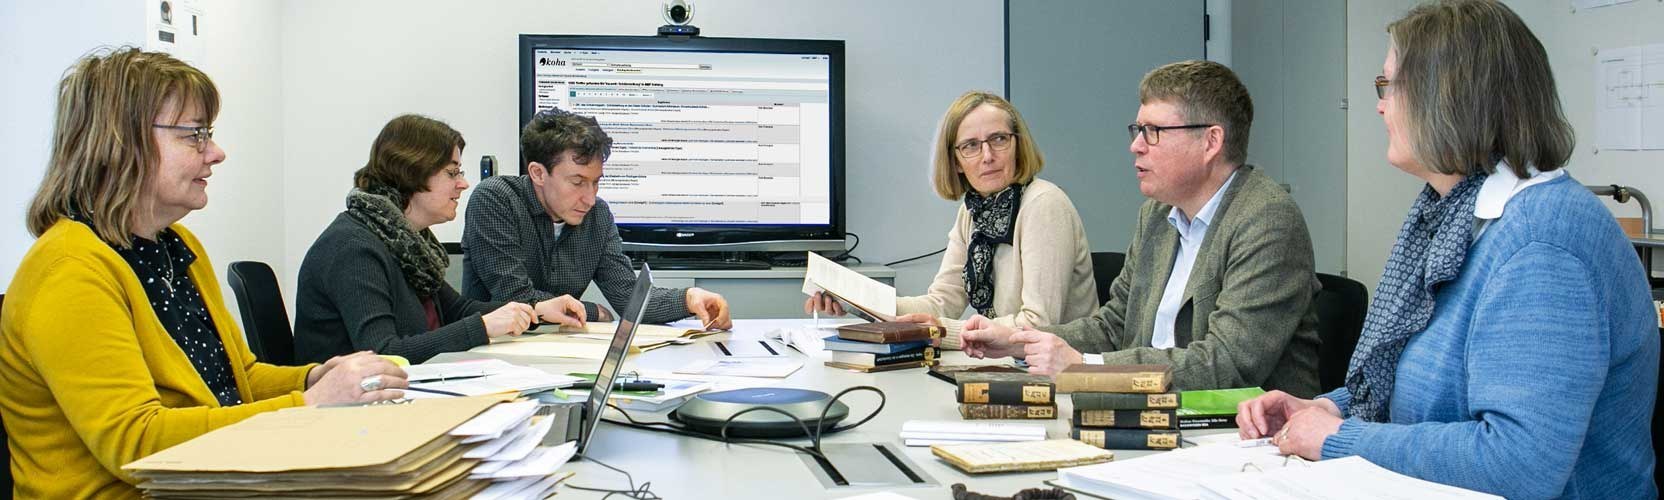 Library team meeting at a round table, in the background a large screen showing the library catalog